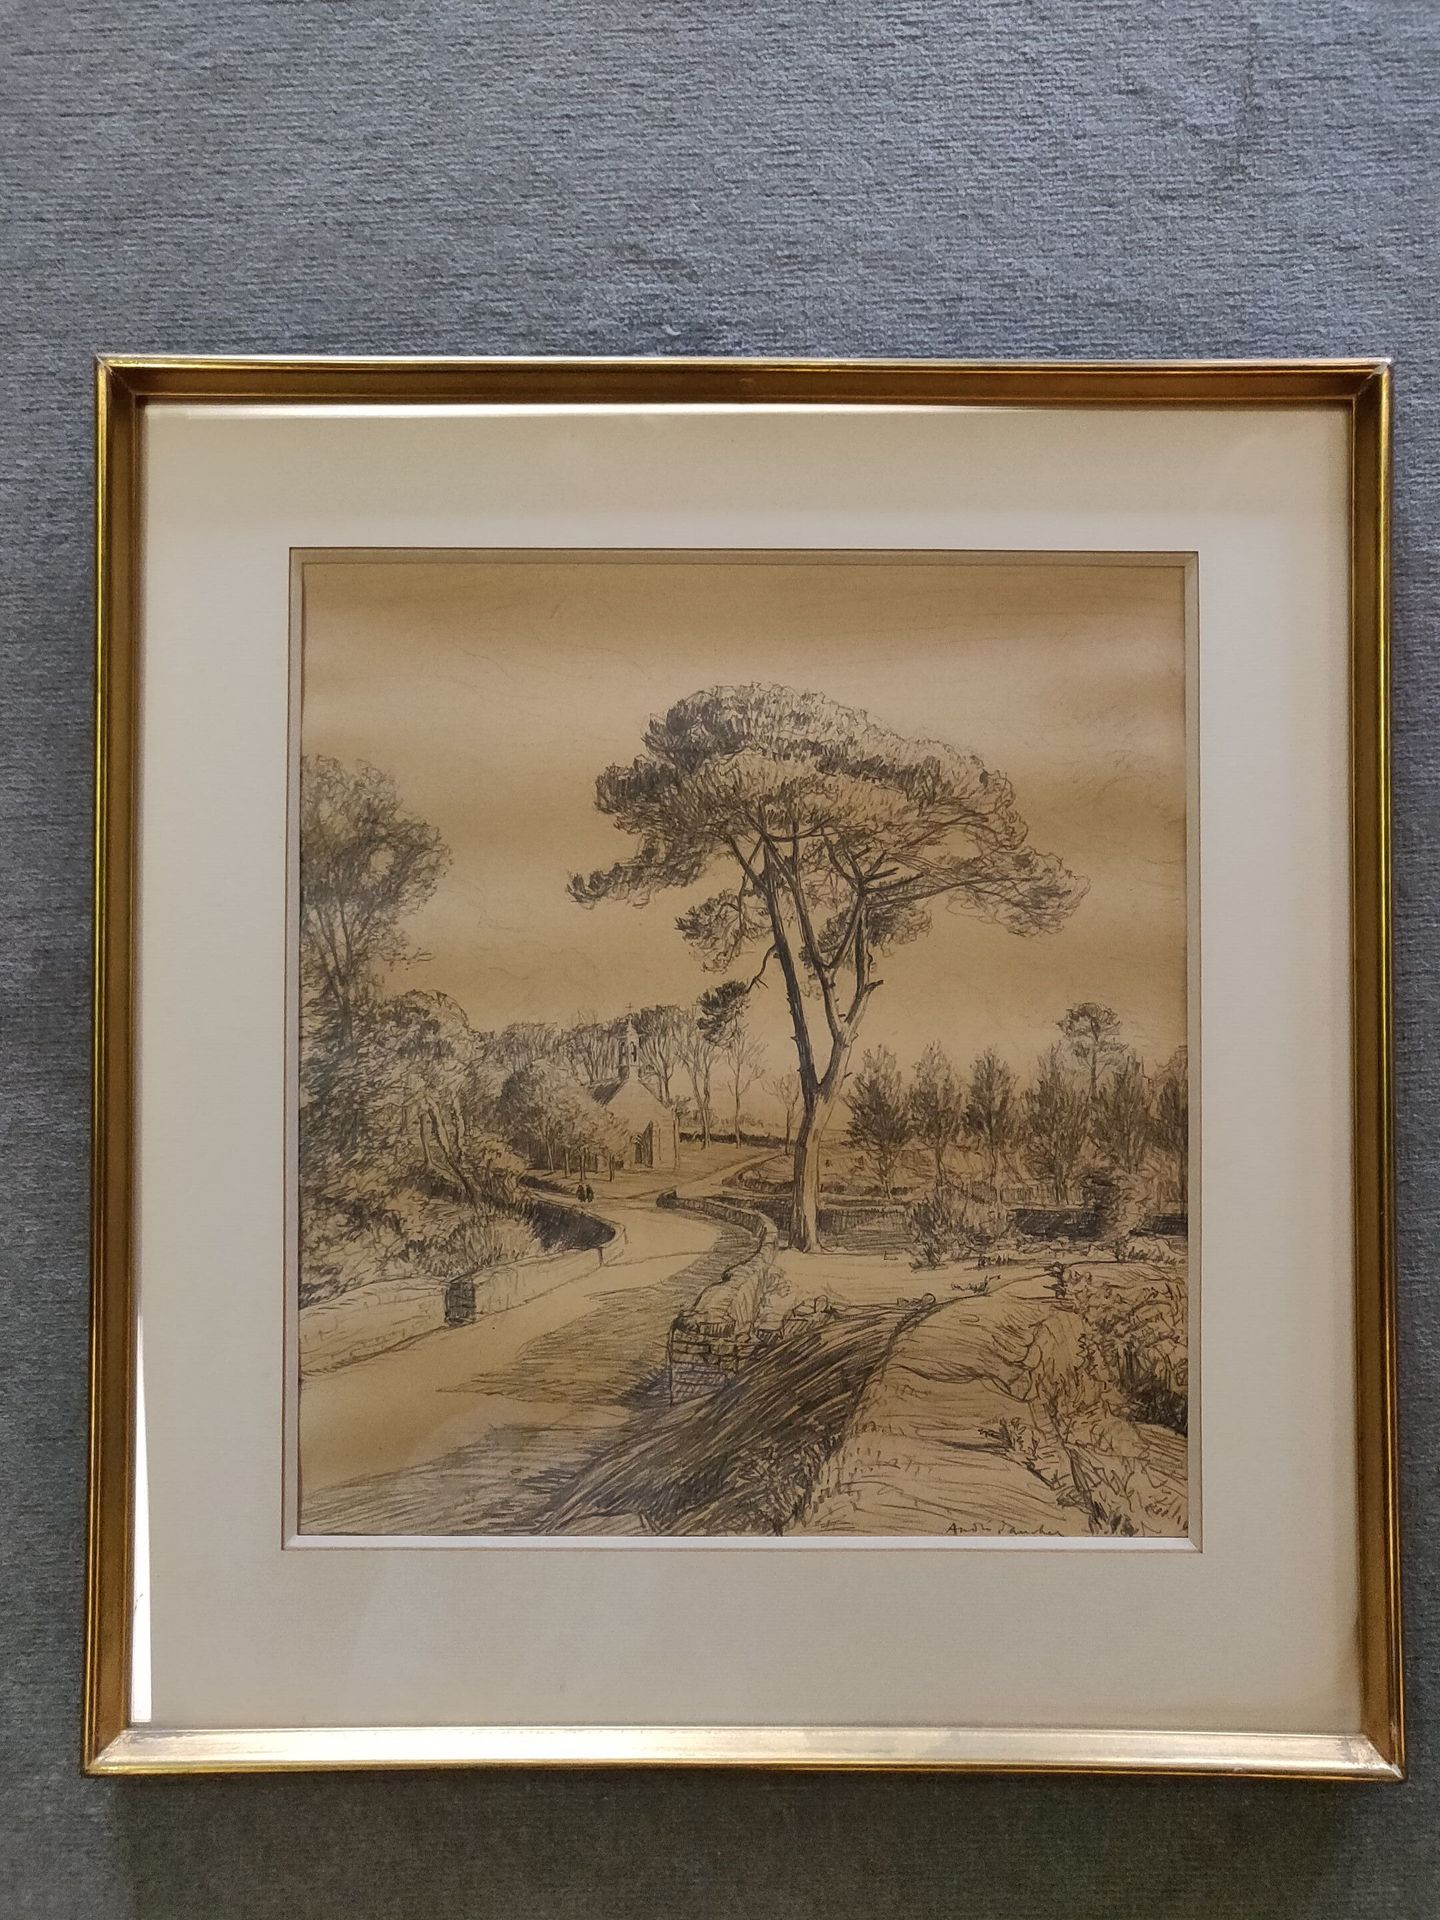 Null "Chapel among the pines".
Black pencil drawing signed in the lower right co&hellip;